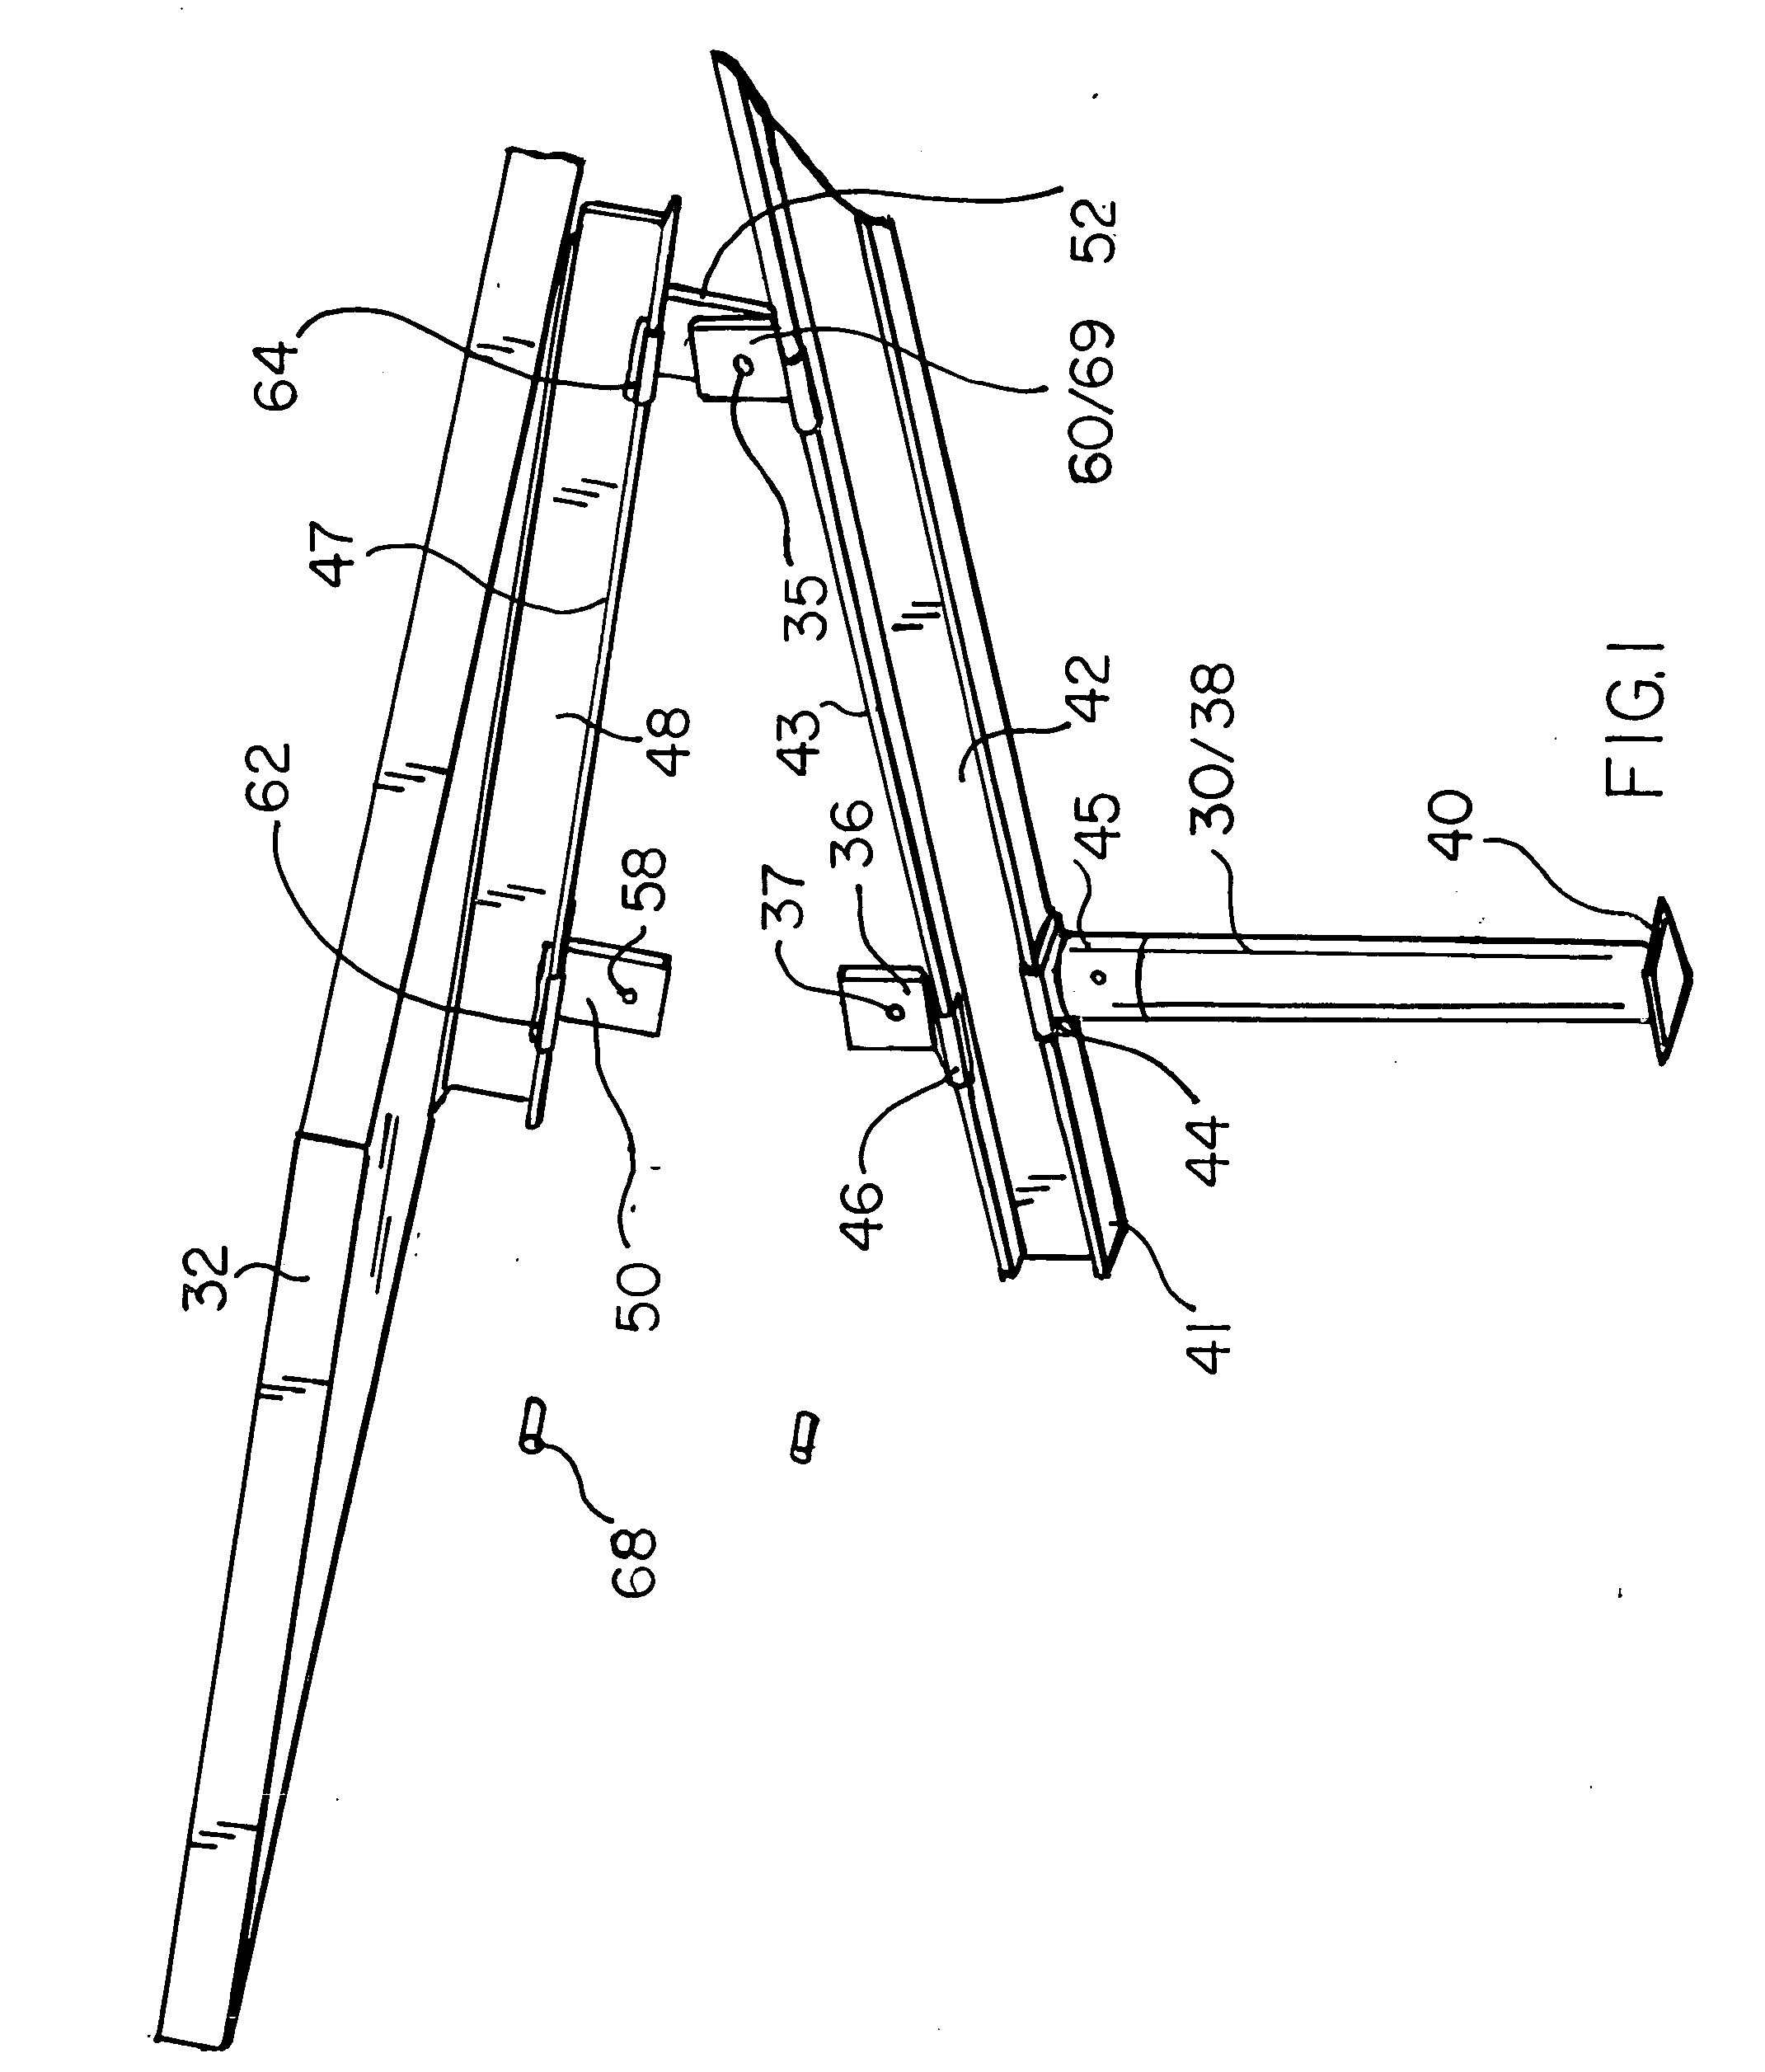 System for mounting and selectable adjustment of angle of elevation of groups of PV panels